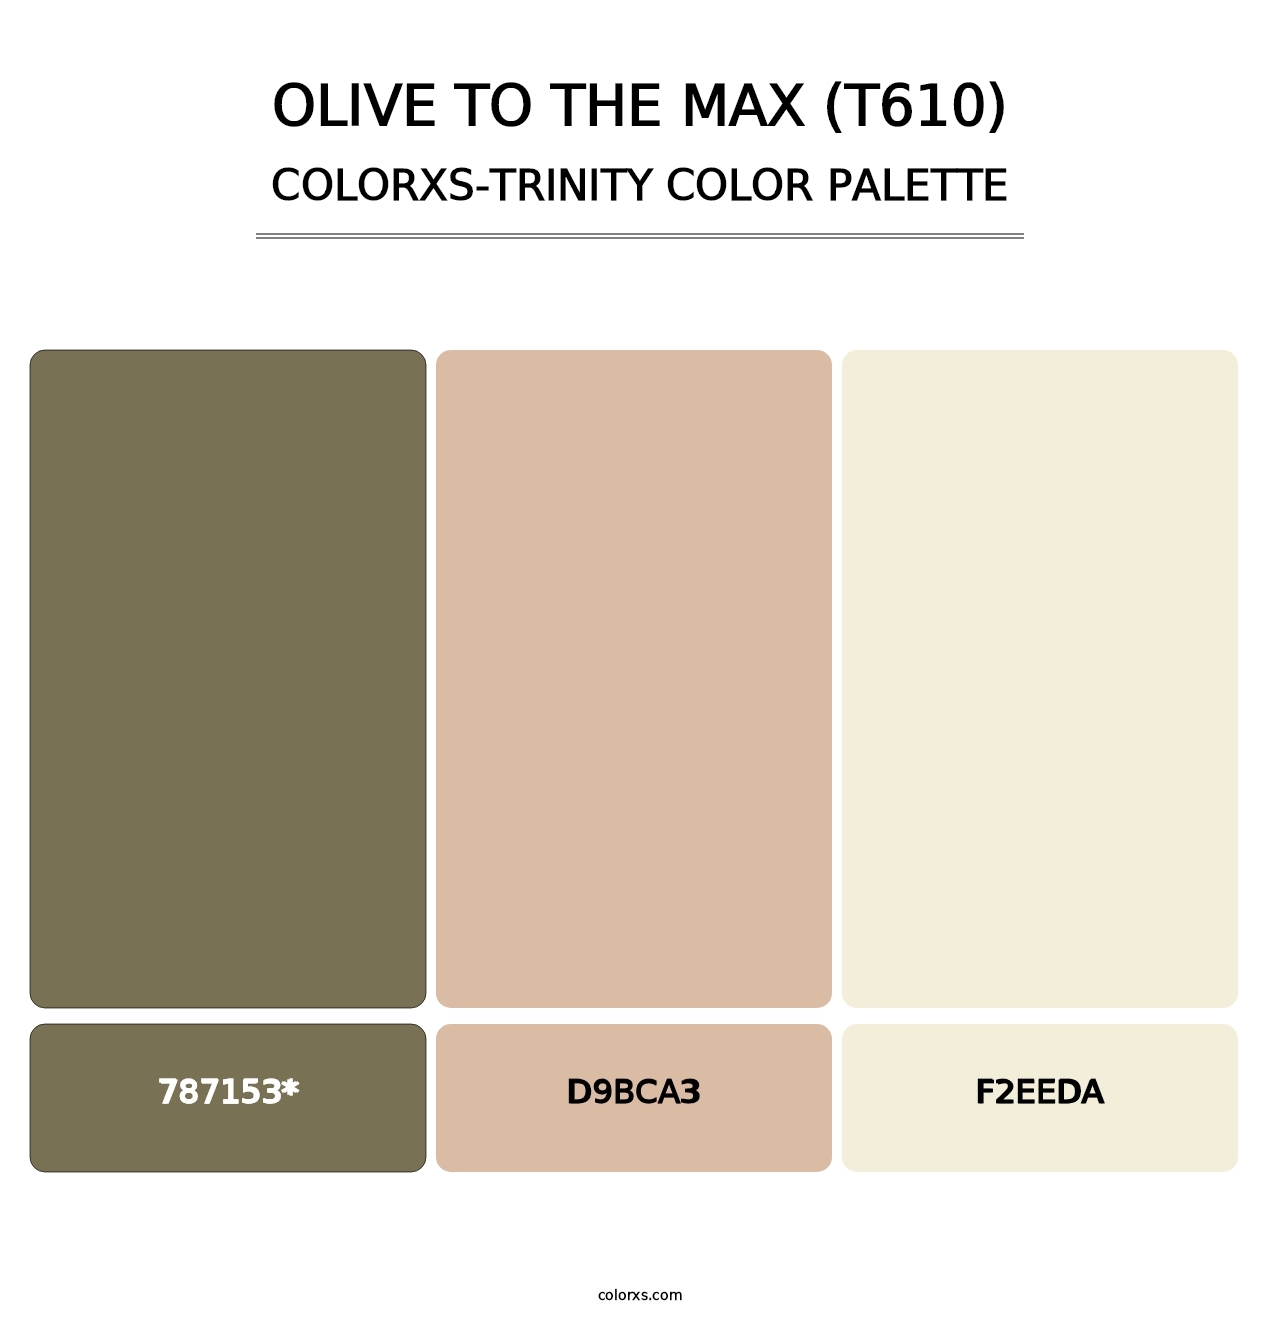 Olive to the Max (T610) - Colorxs Trinity Palette